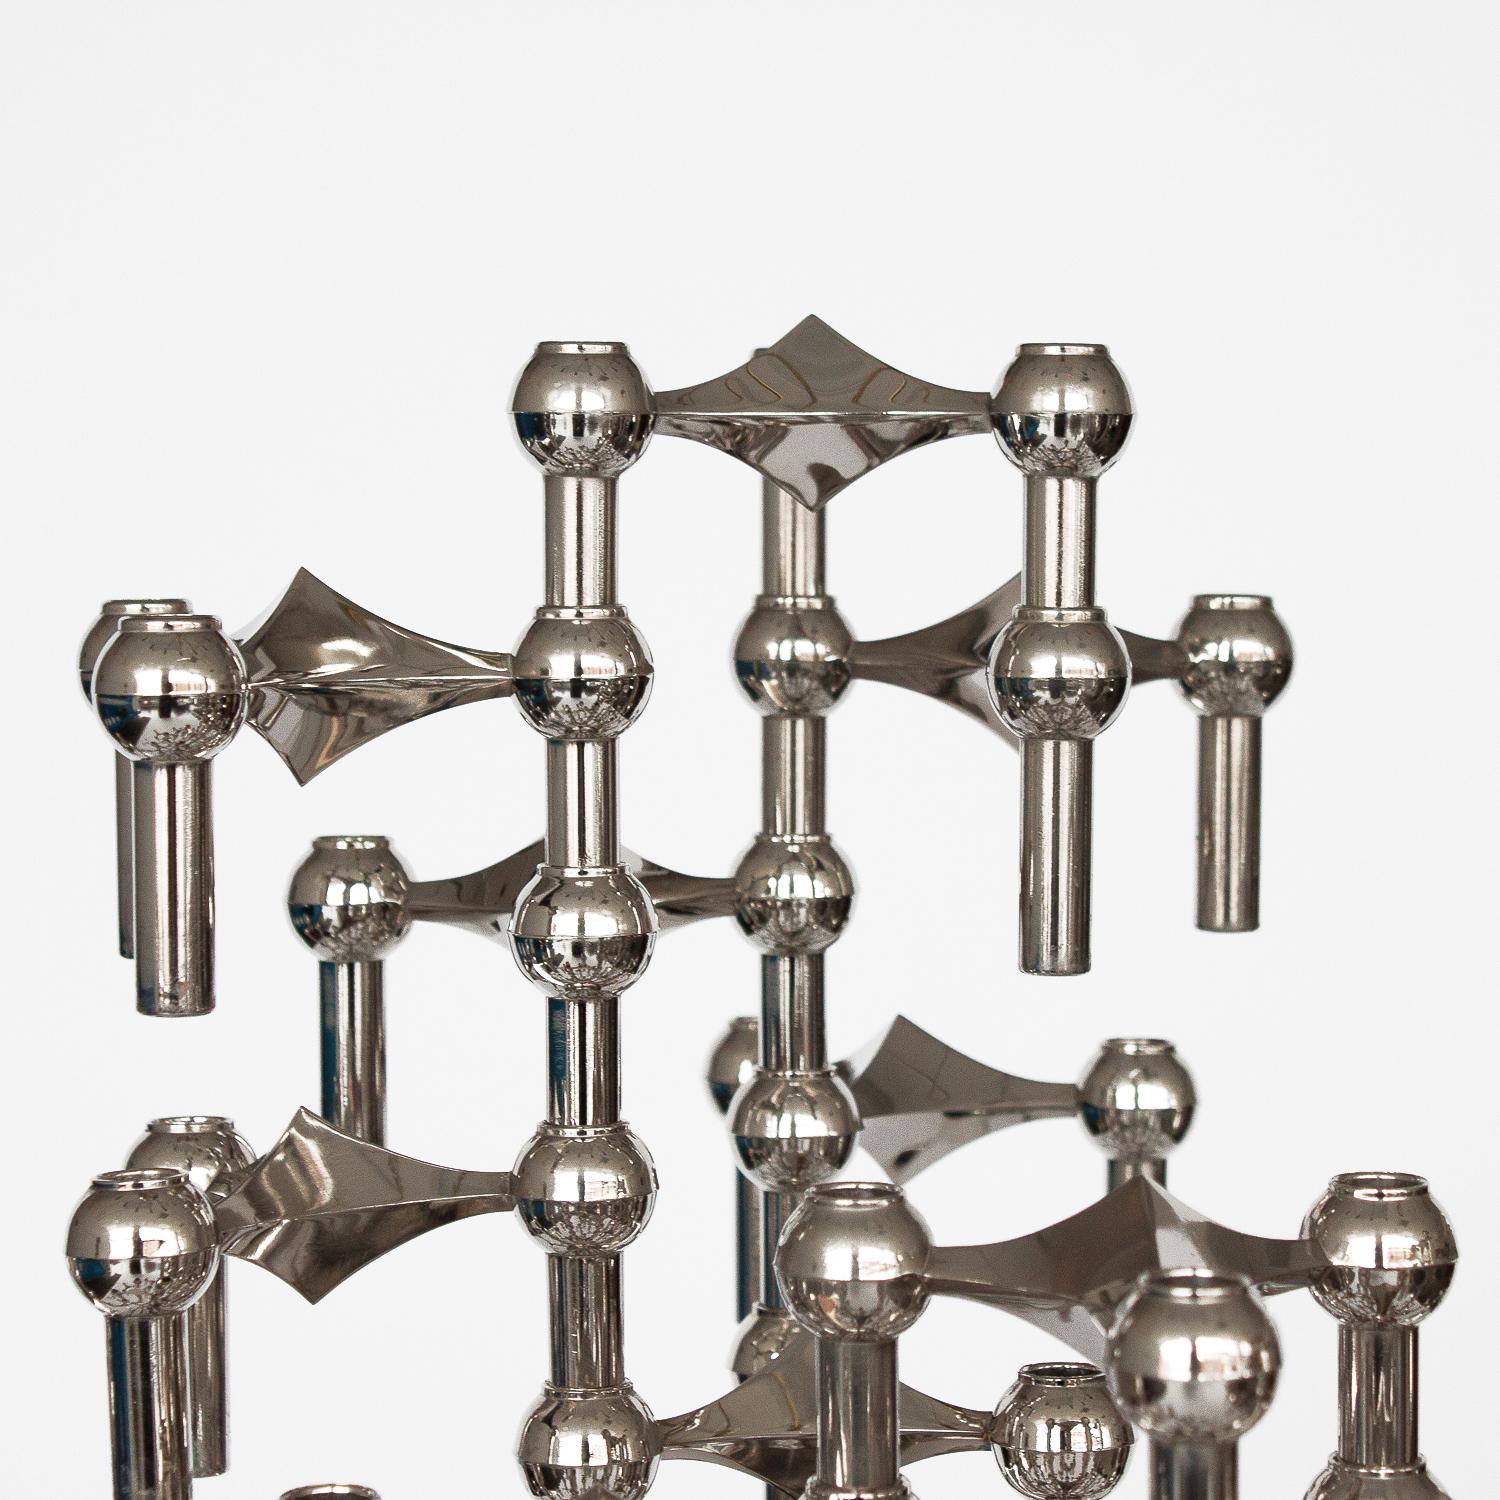 Mid-20th Century Set of 56 Piece Modular Candlestick Sculpture by Fritz Nagel and Caesar Stoffi